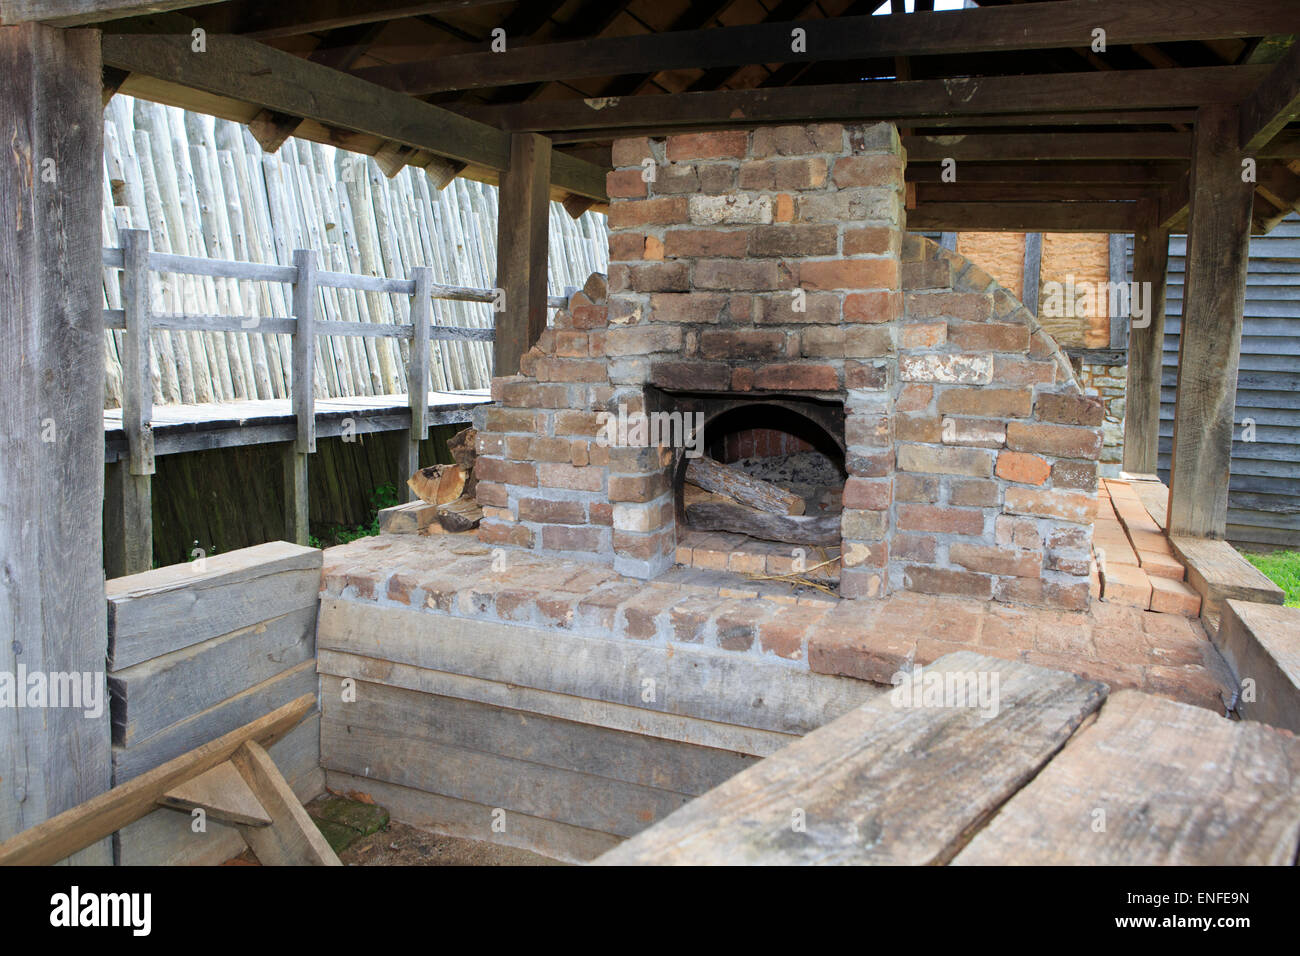 Outdoor kitchen at Fort Loudoun State Park, TN, French and Indian Wars historical site. Stock Photo